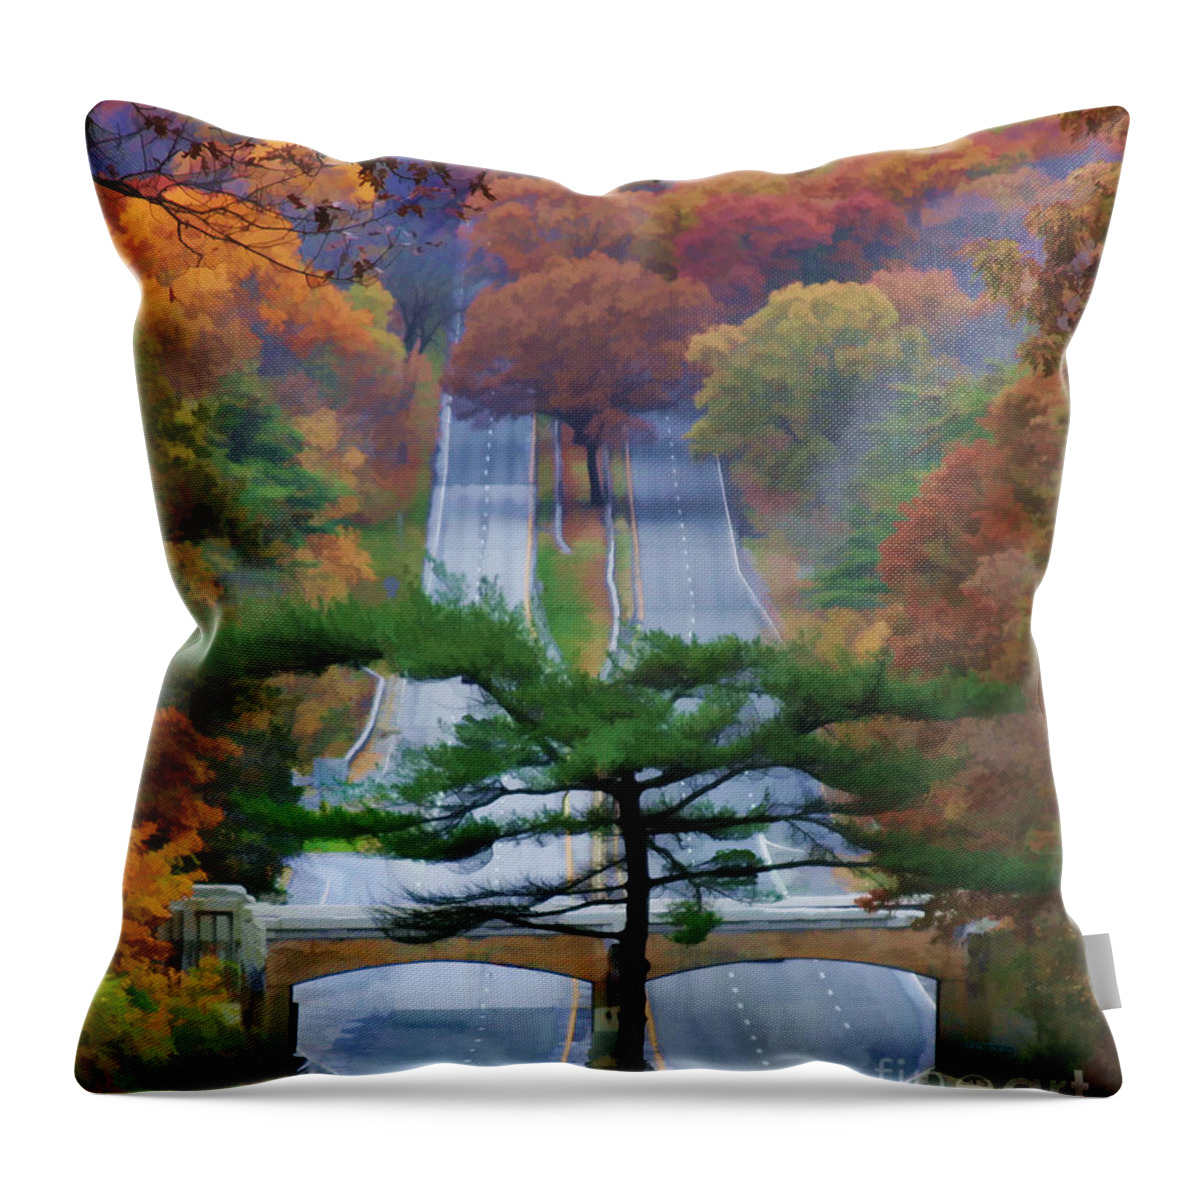 Road Throw Pillow featuring the digital art October Road by Xine Segalas